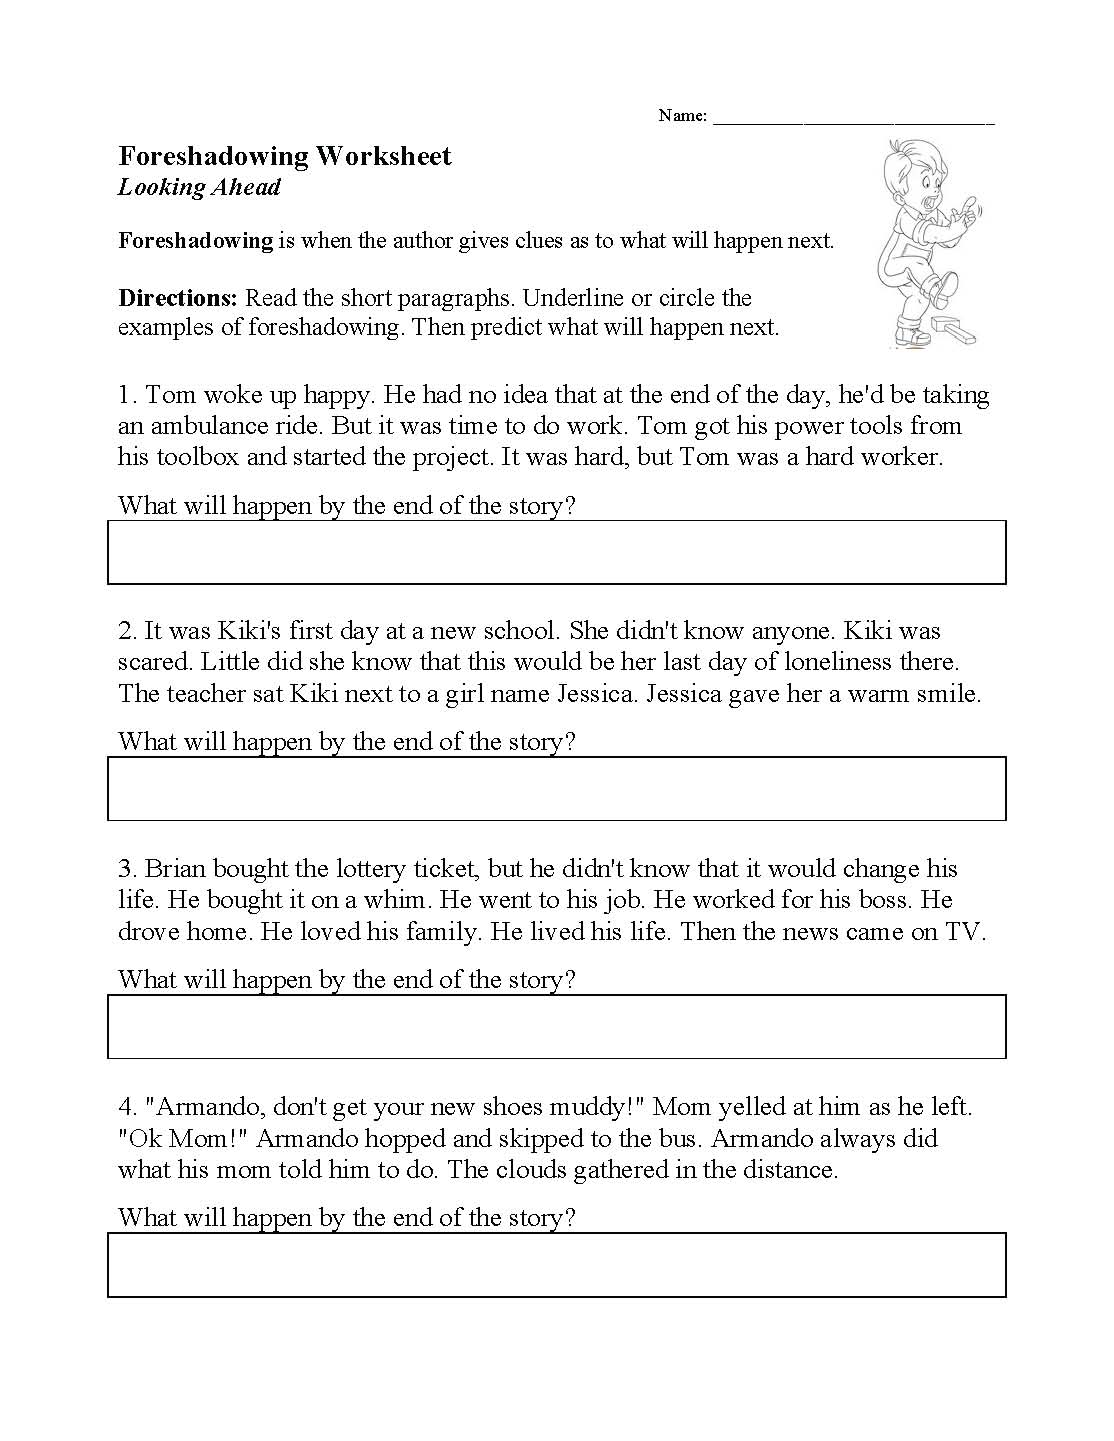 This is a preview image of our Foreshadowing Worksheet. Click on it to enlarge or view the source file.